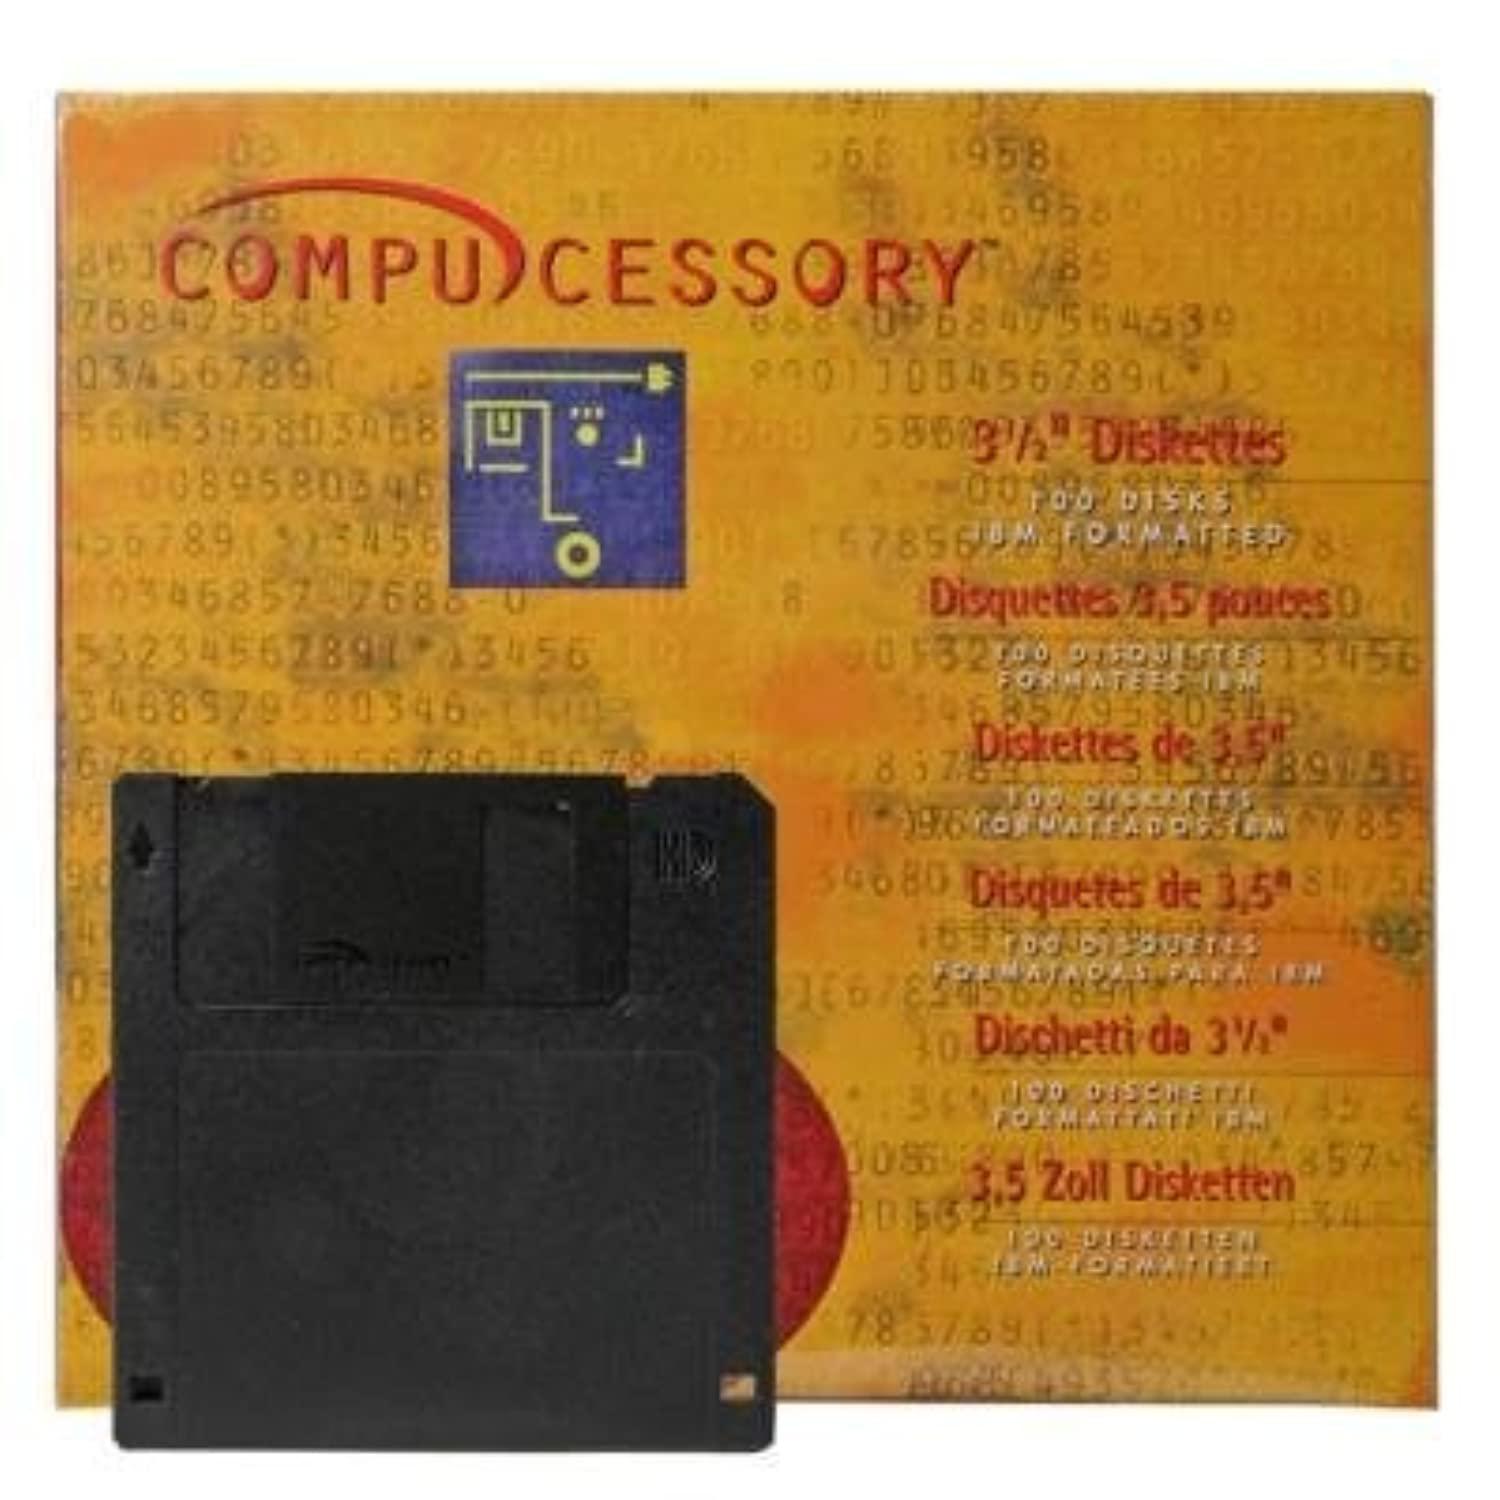 compucessory 1.44mb floppy disk